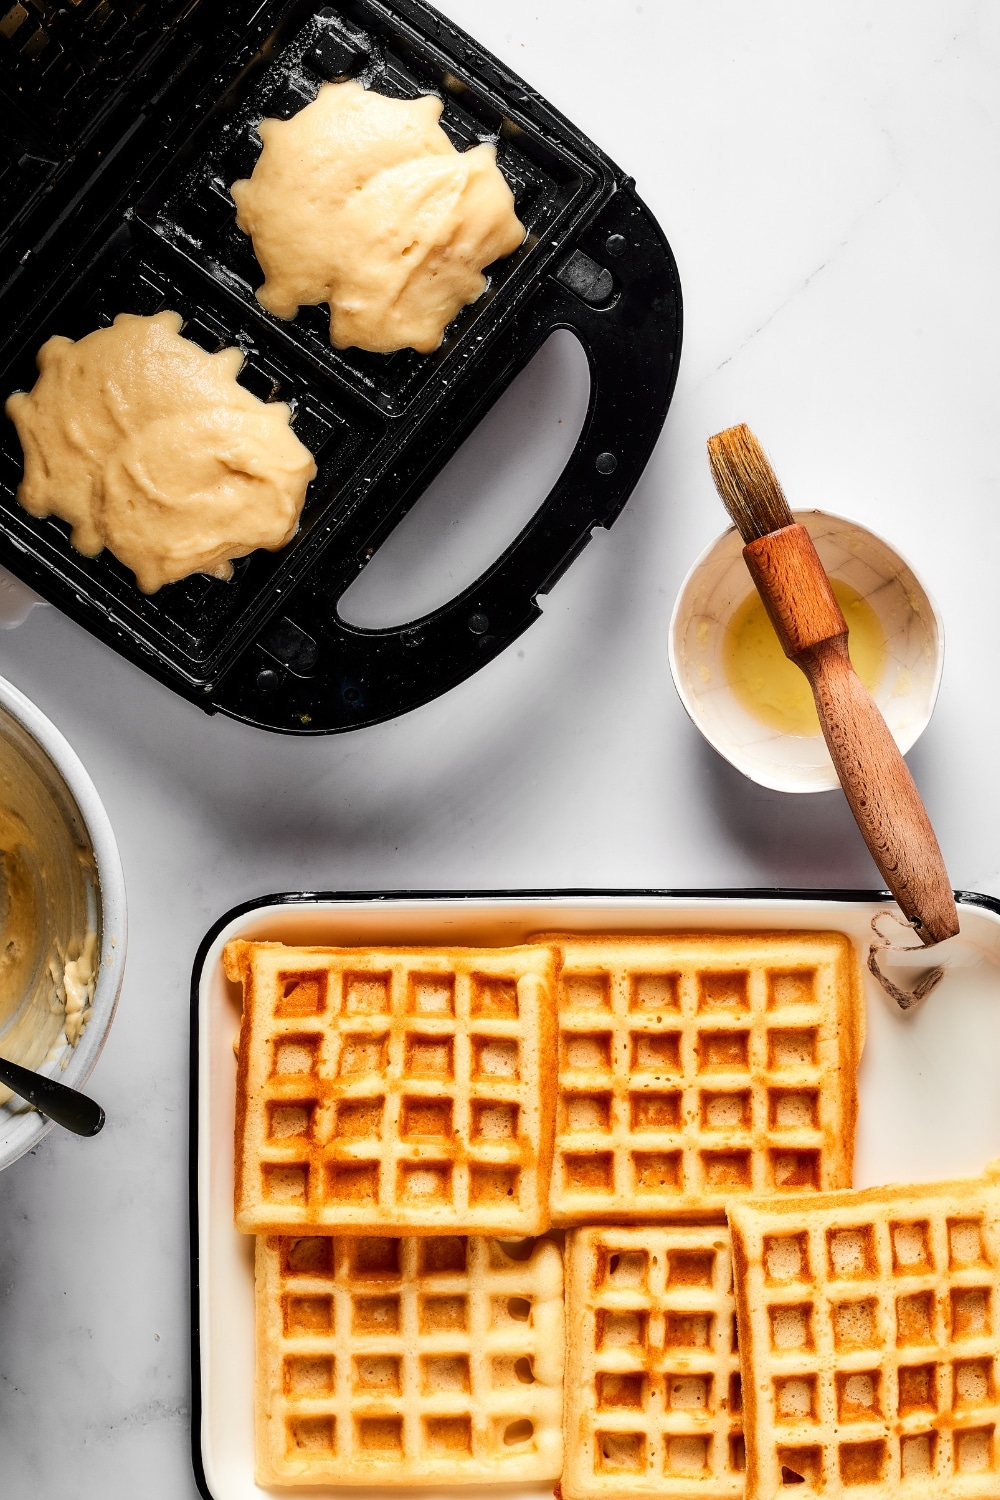 A waffle iron with two scoops of batter in it. In front of that is part of a plate with waffles on it.